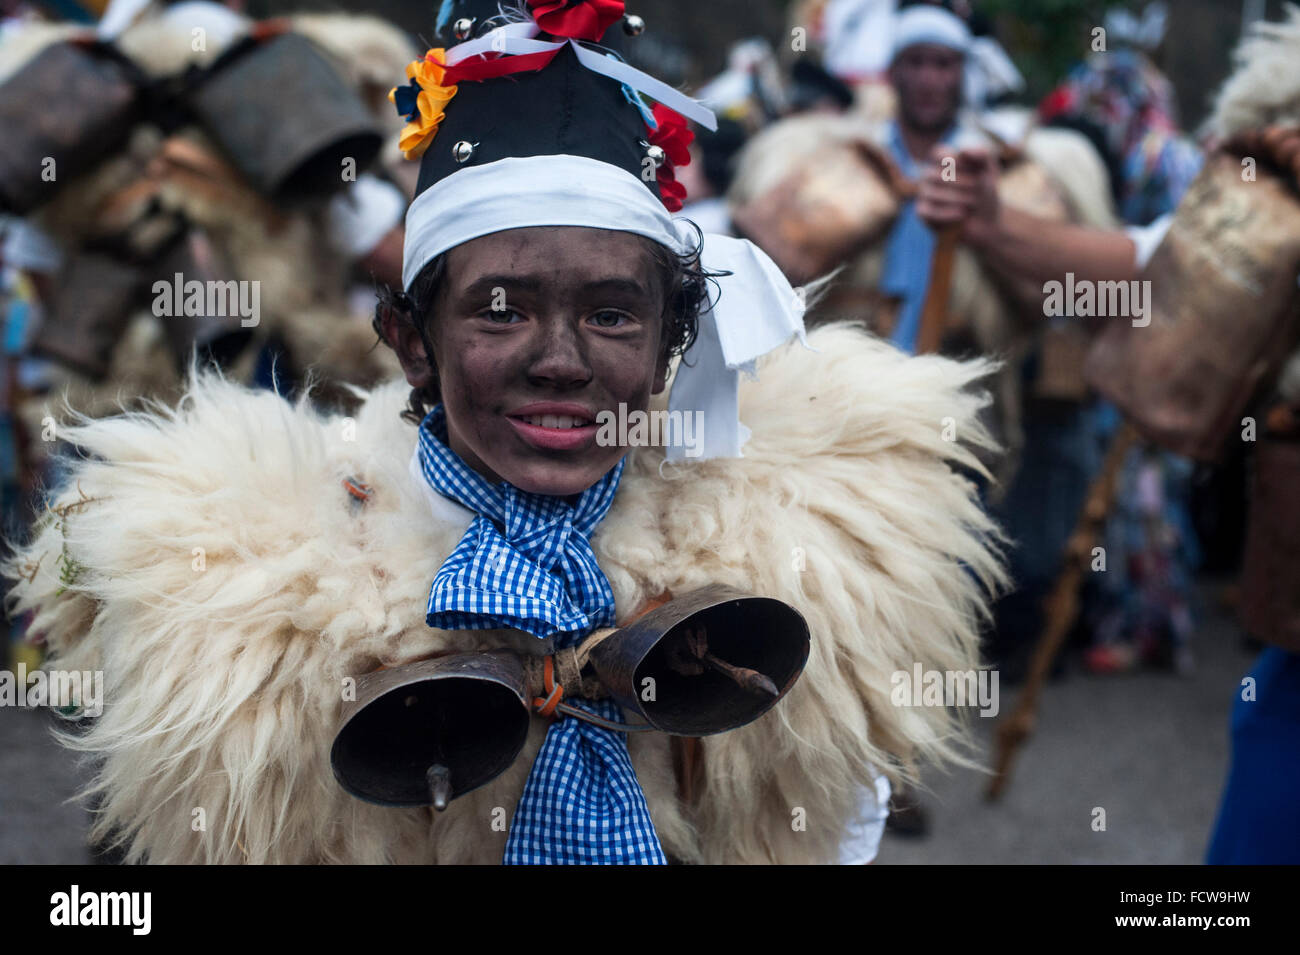 Many young people follow the tradition of carnival Vijanera as this portrait of a young woman with her costume zarramaco Stock Photo